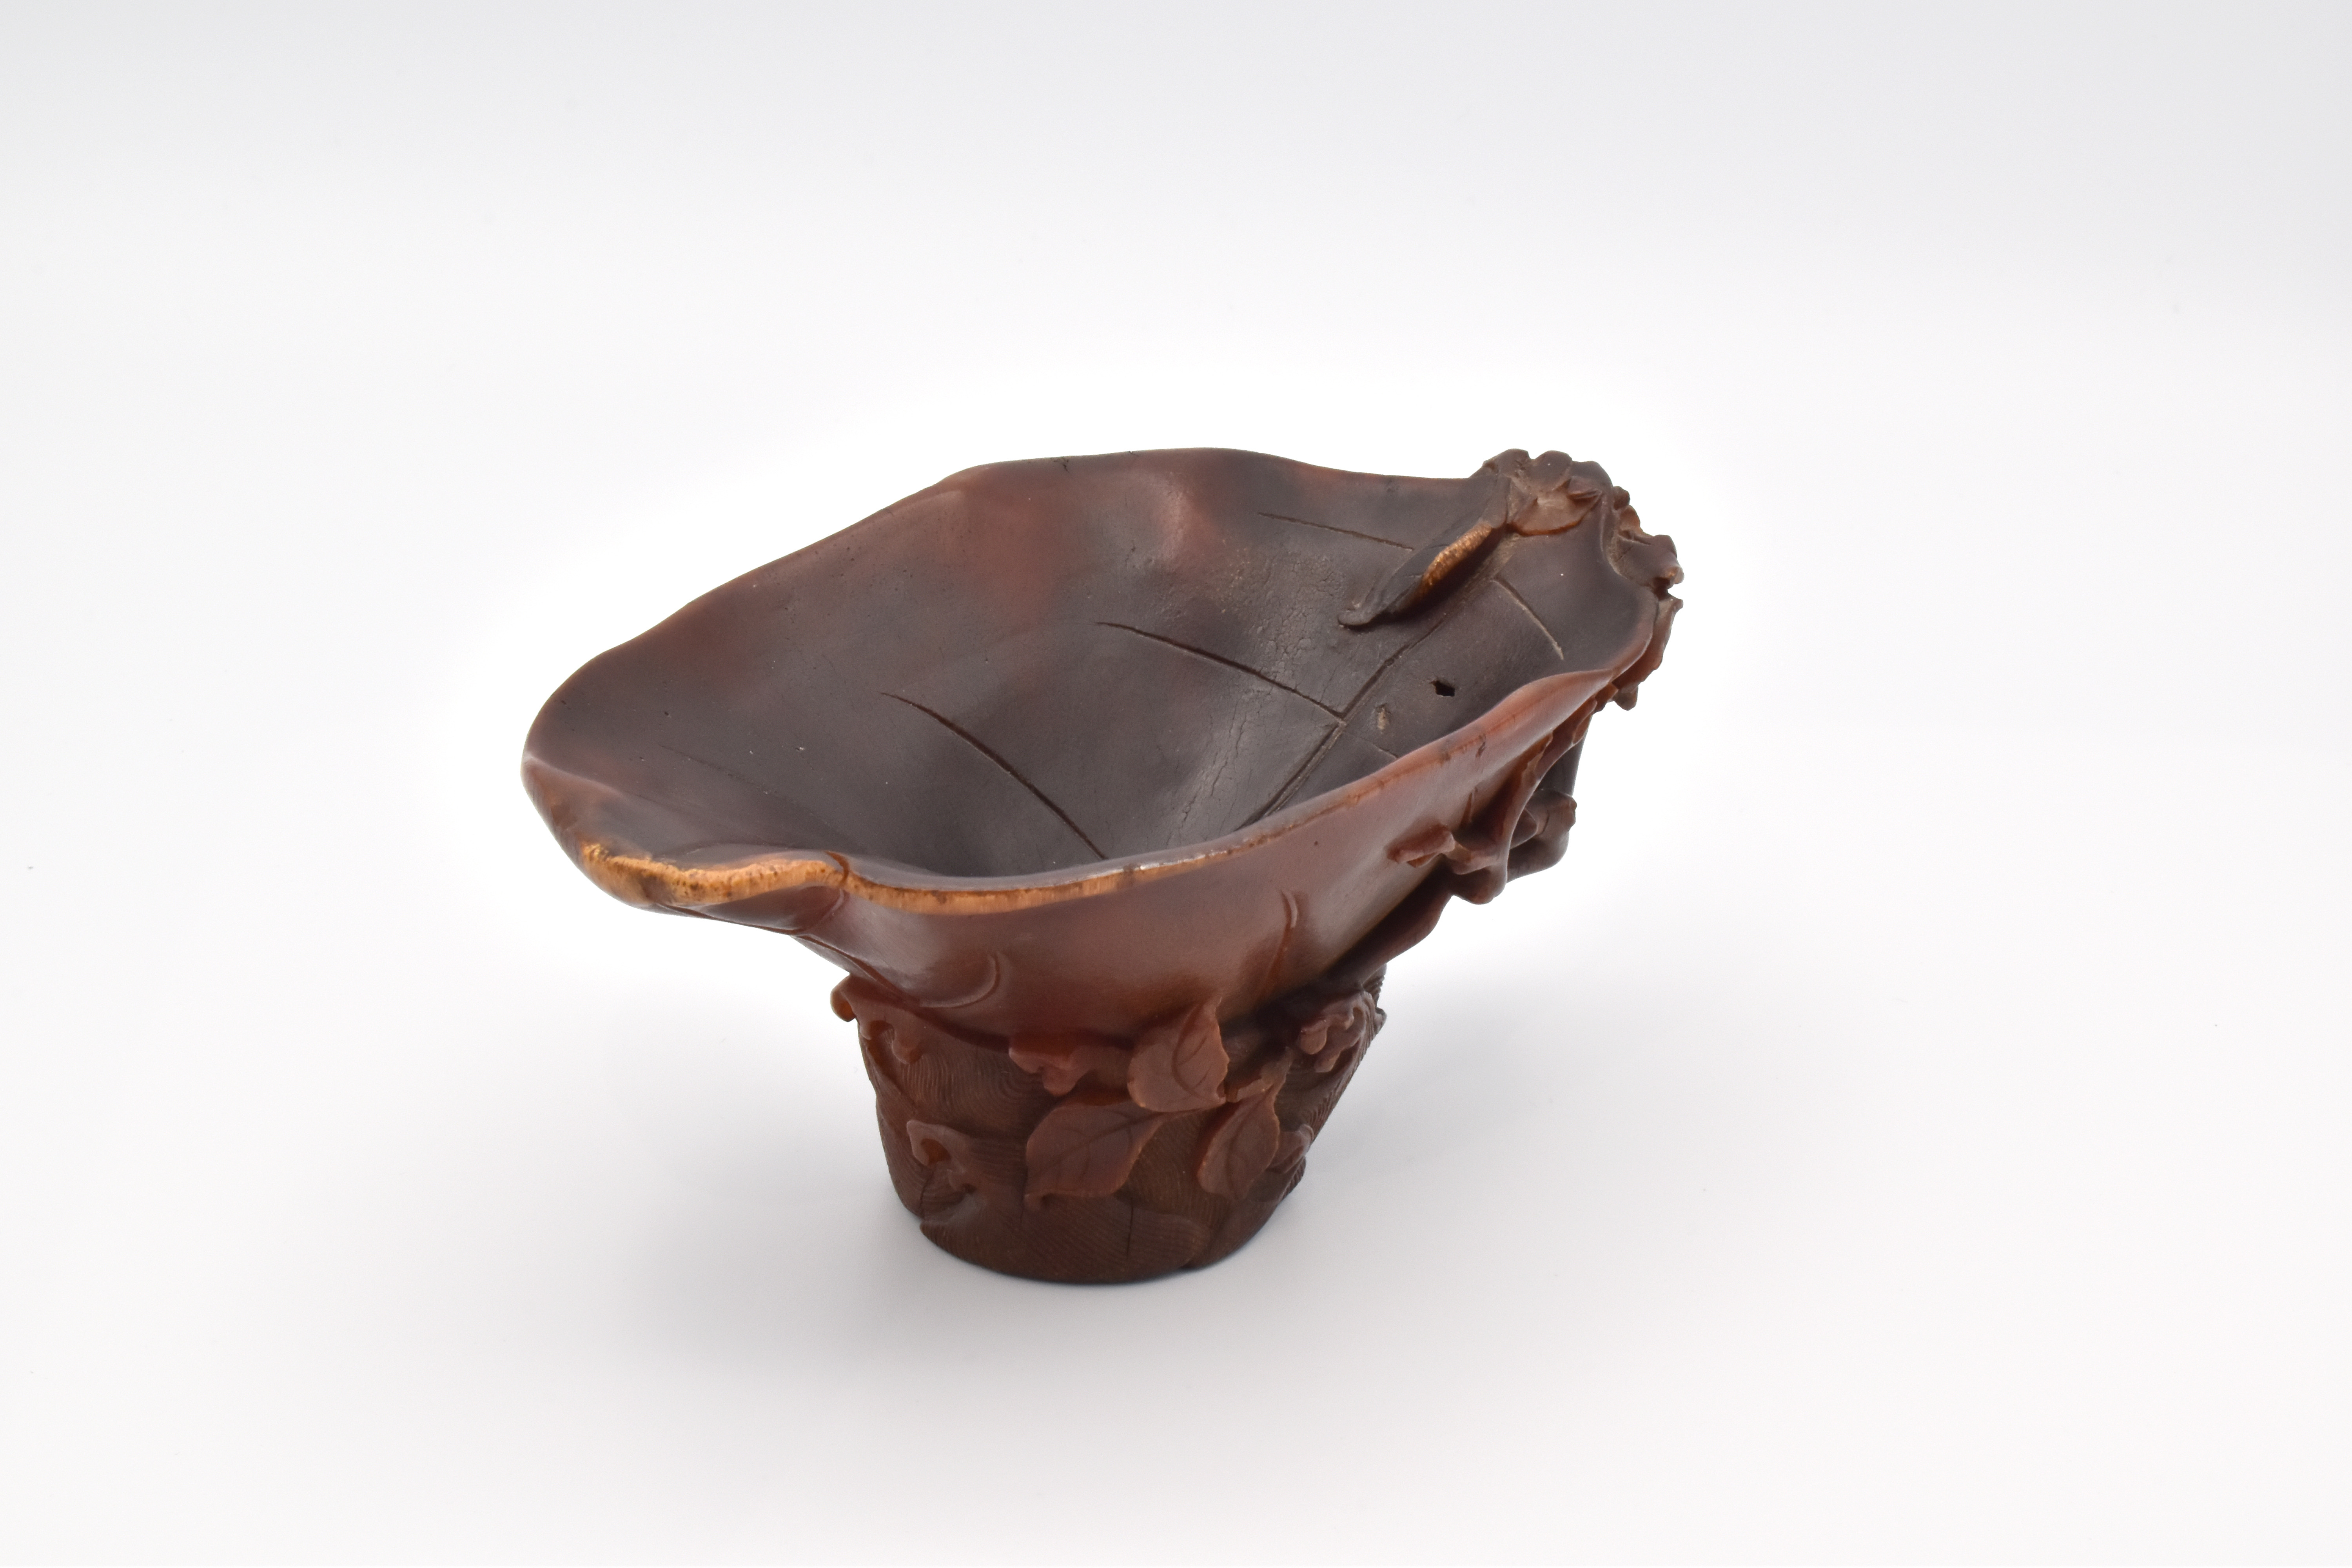 A RARE CHINESE RHINOCEROS HORN ‘CAMELLIA LEAF’ LIBATION CUP, QING DYNASTY, 17TH CENTURY - Image 3 of 30